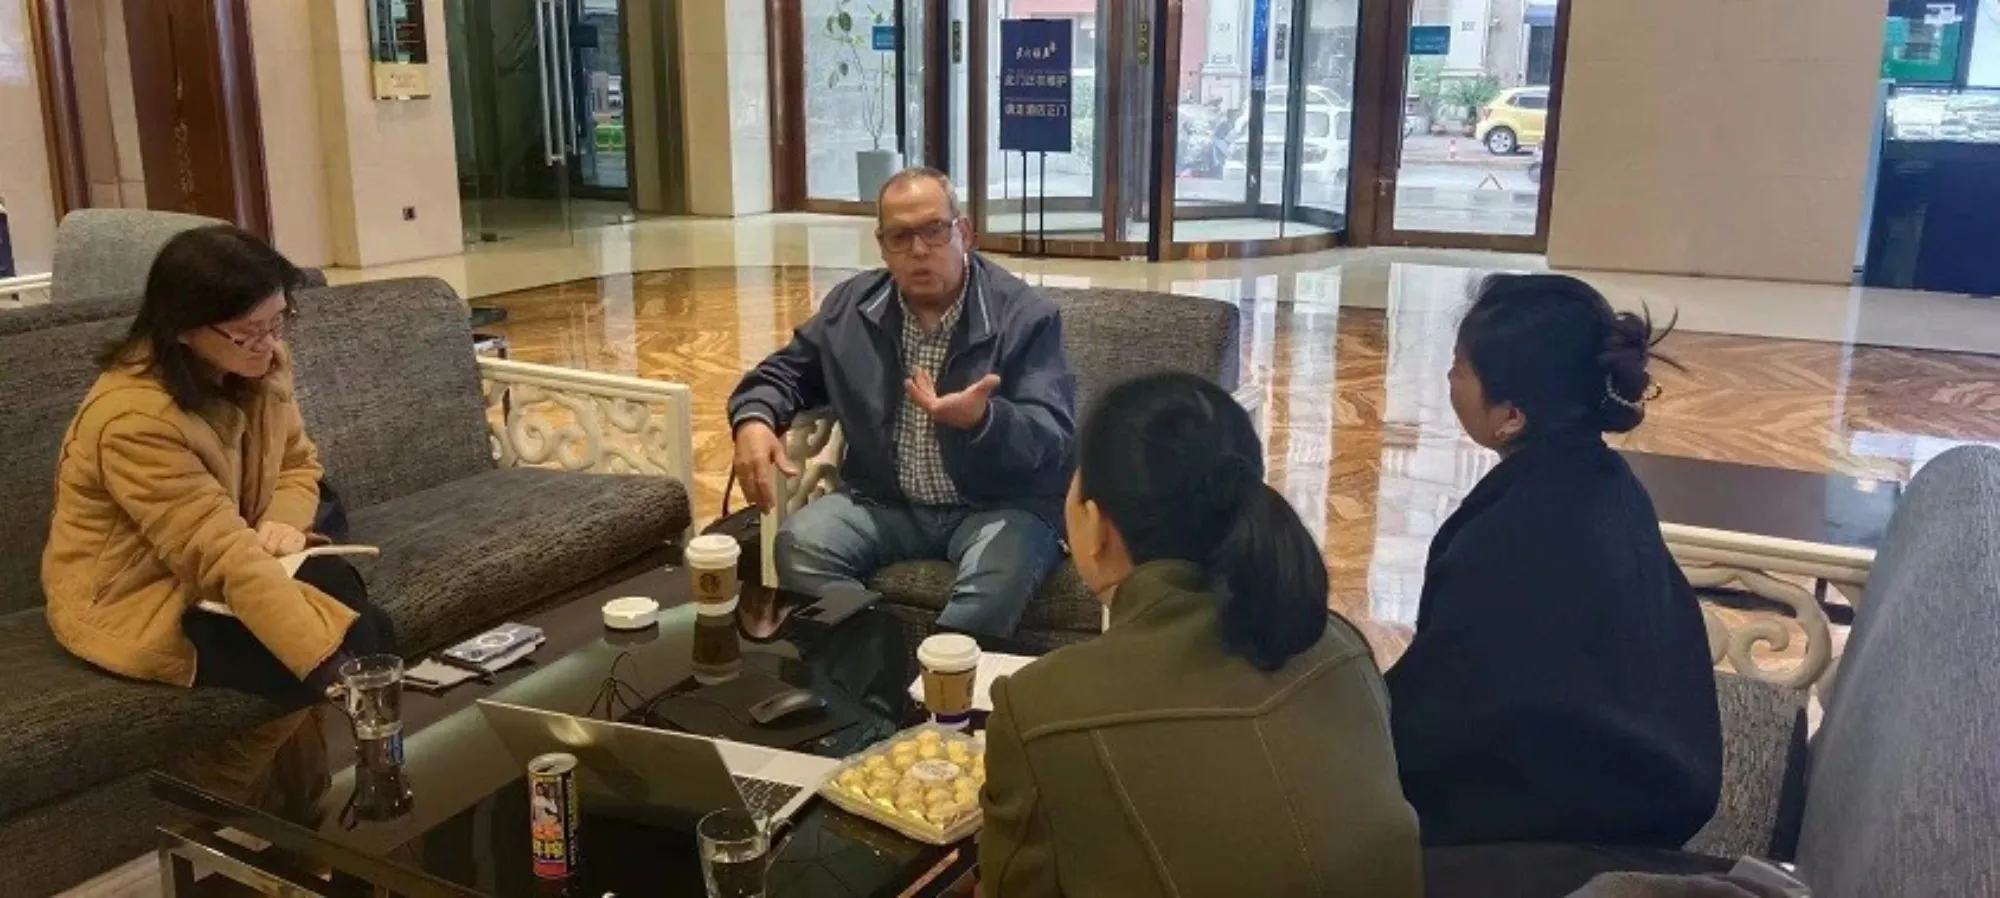 Old Client Came To China And Discuss Deeper Cooperation